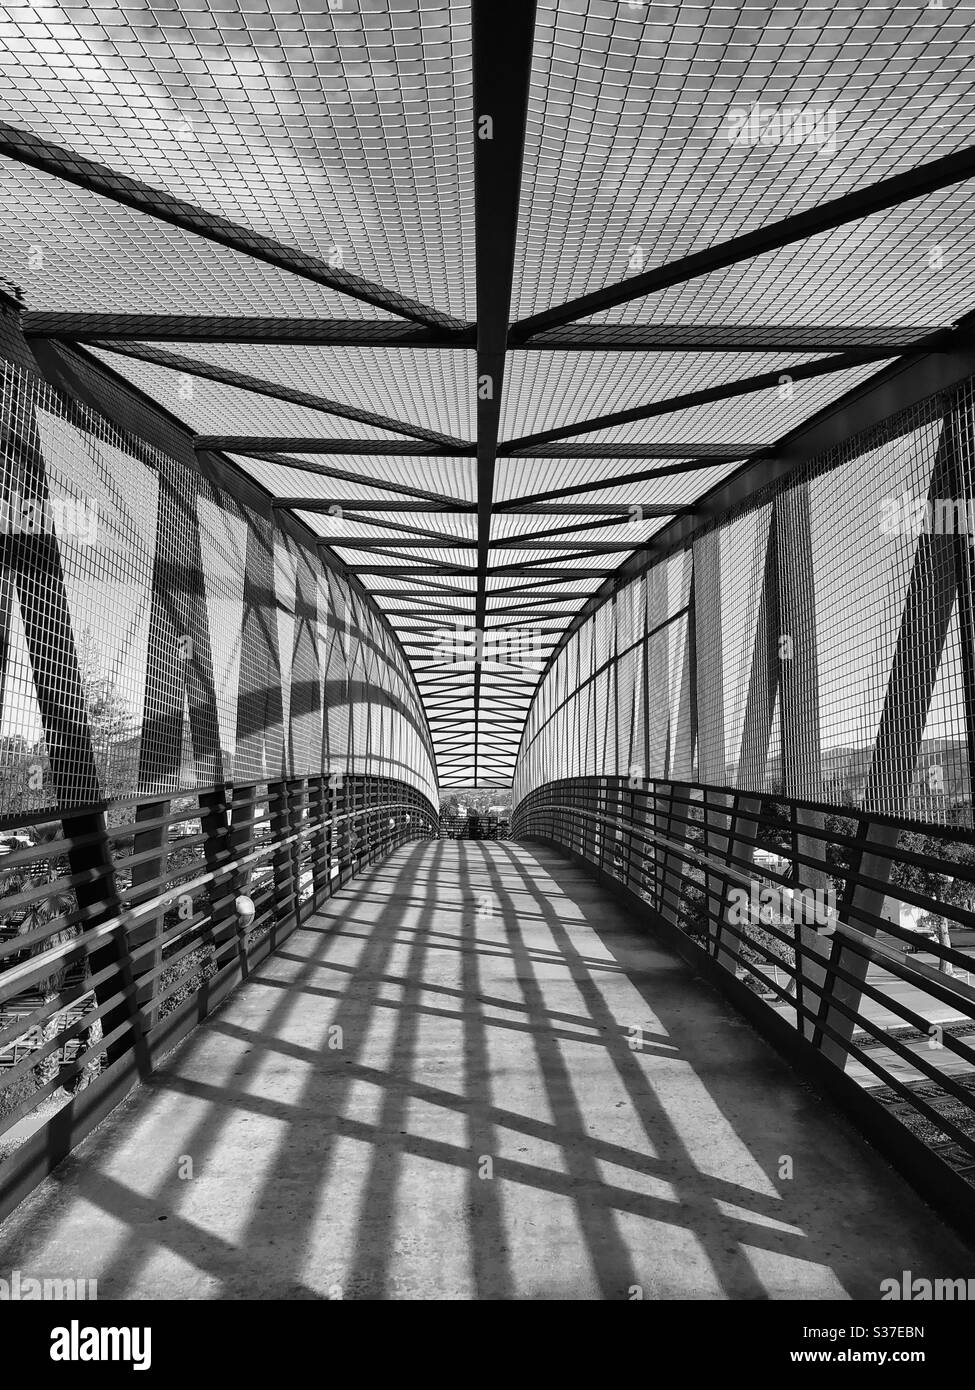 Black and white bridge with shadows and patterns Stock Photo